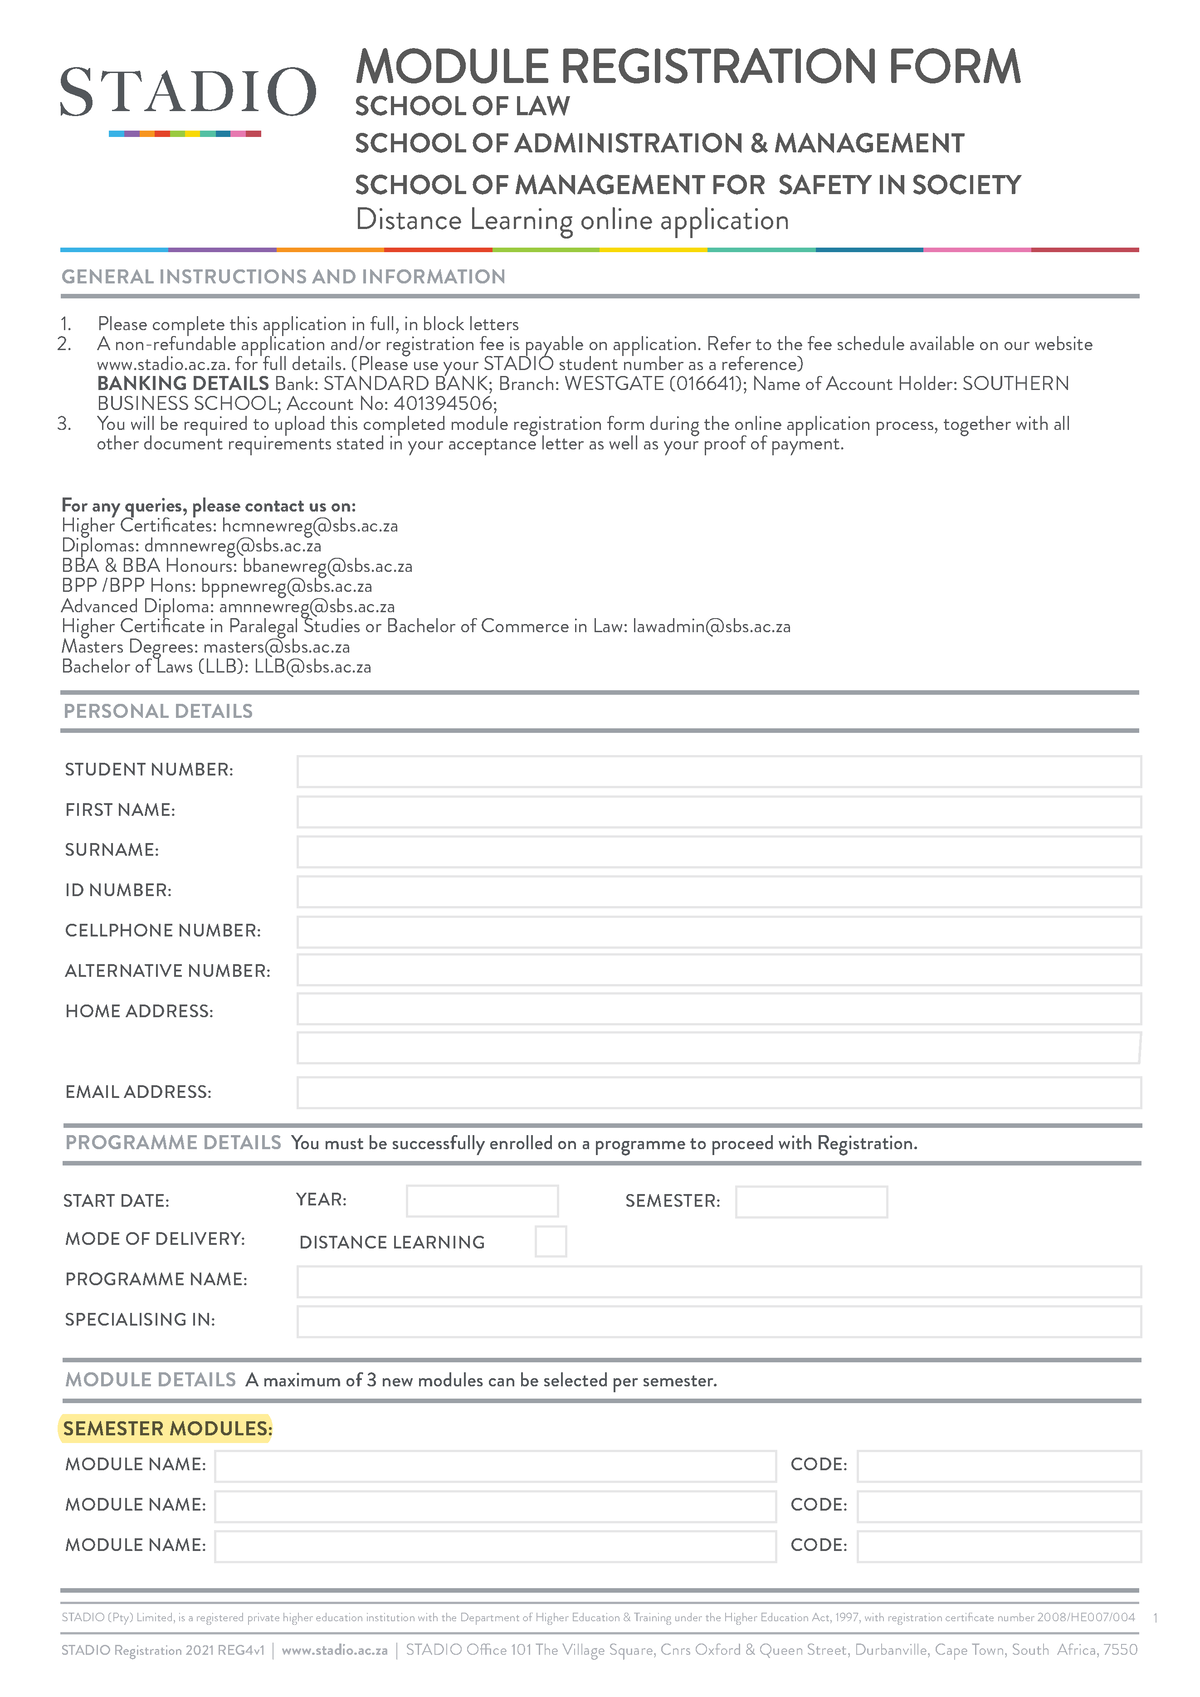 Mod reg form K copy notes STADIO (Pty) Limited, is a registered